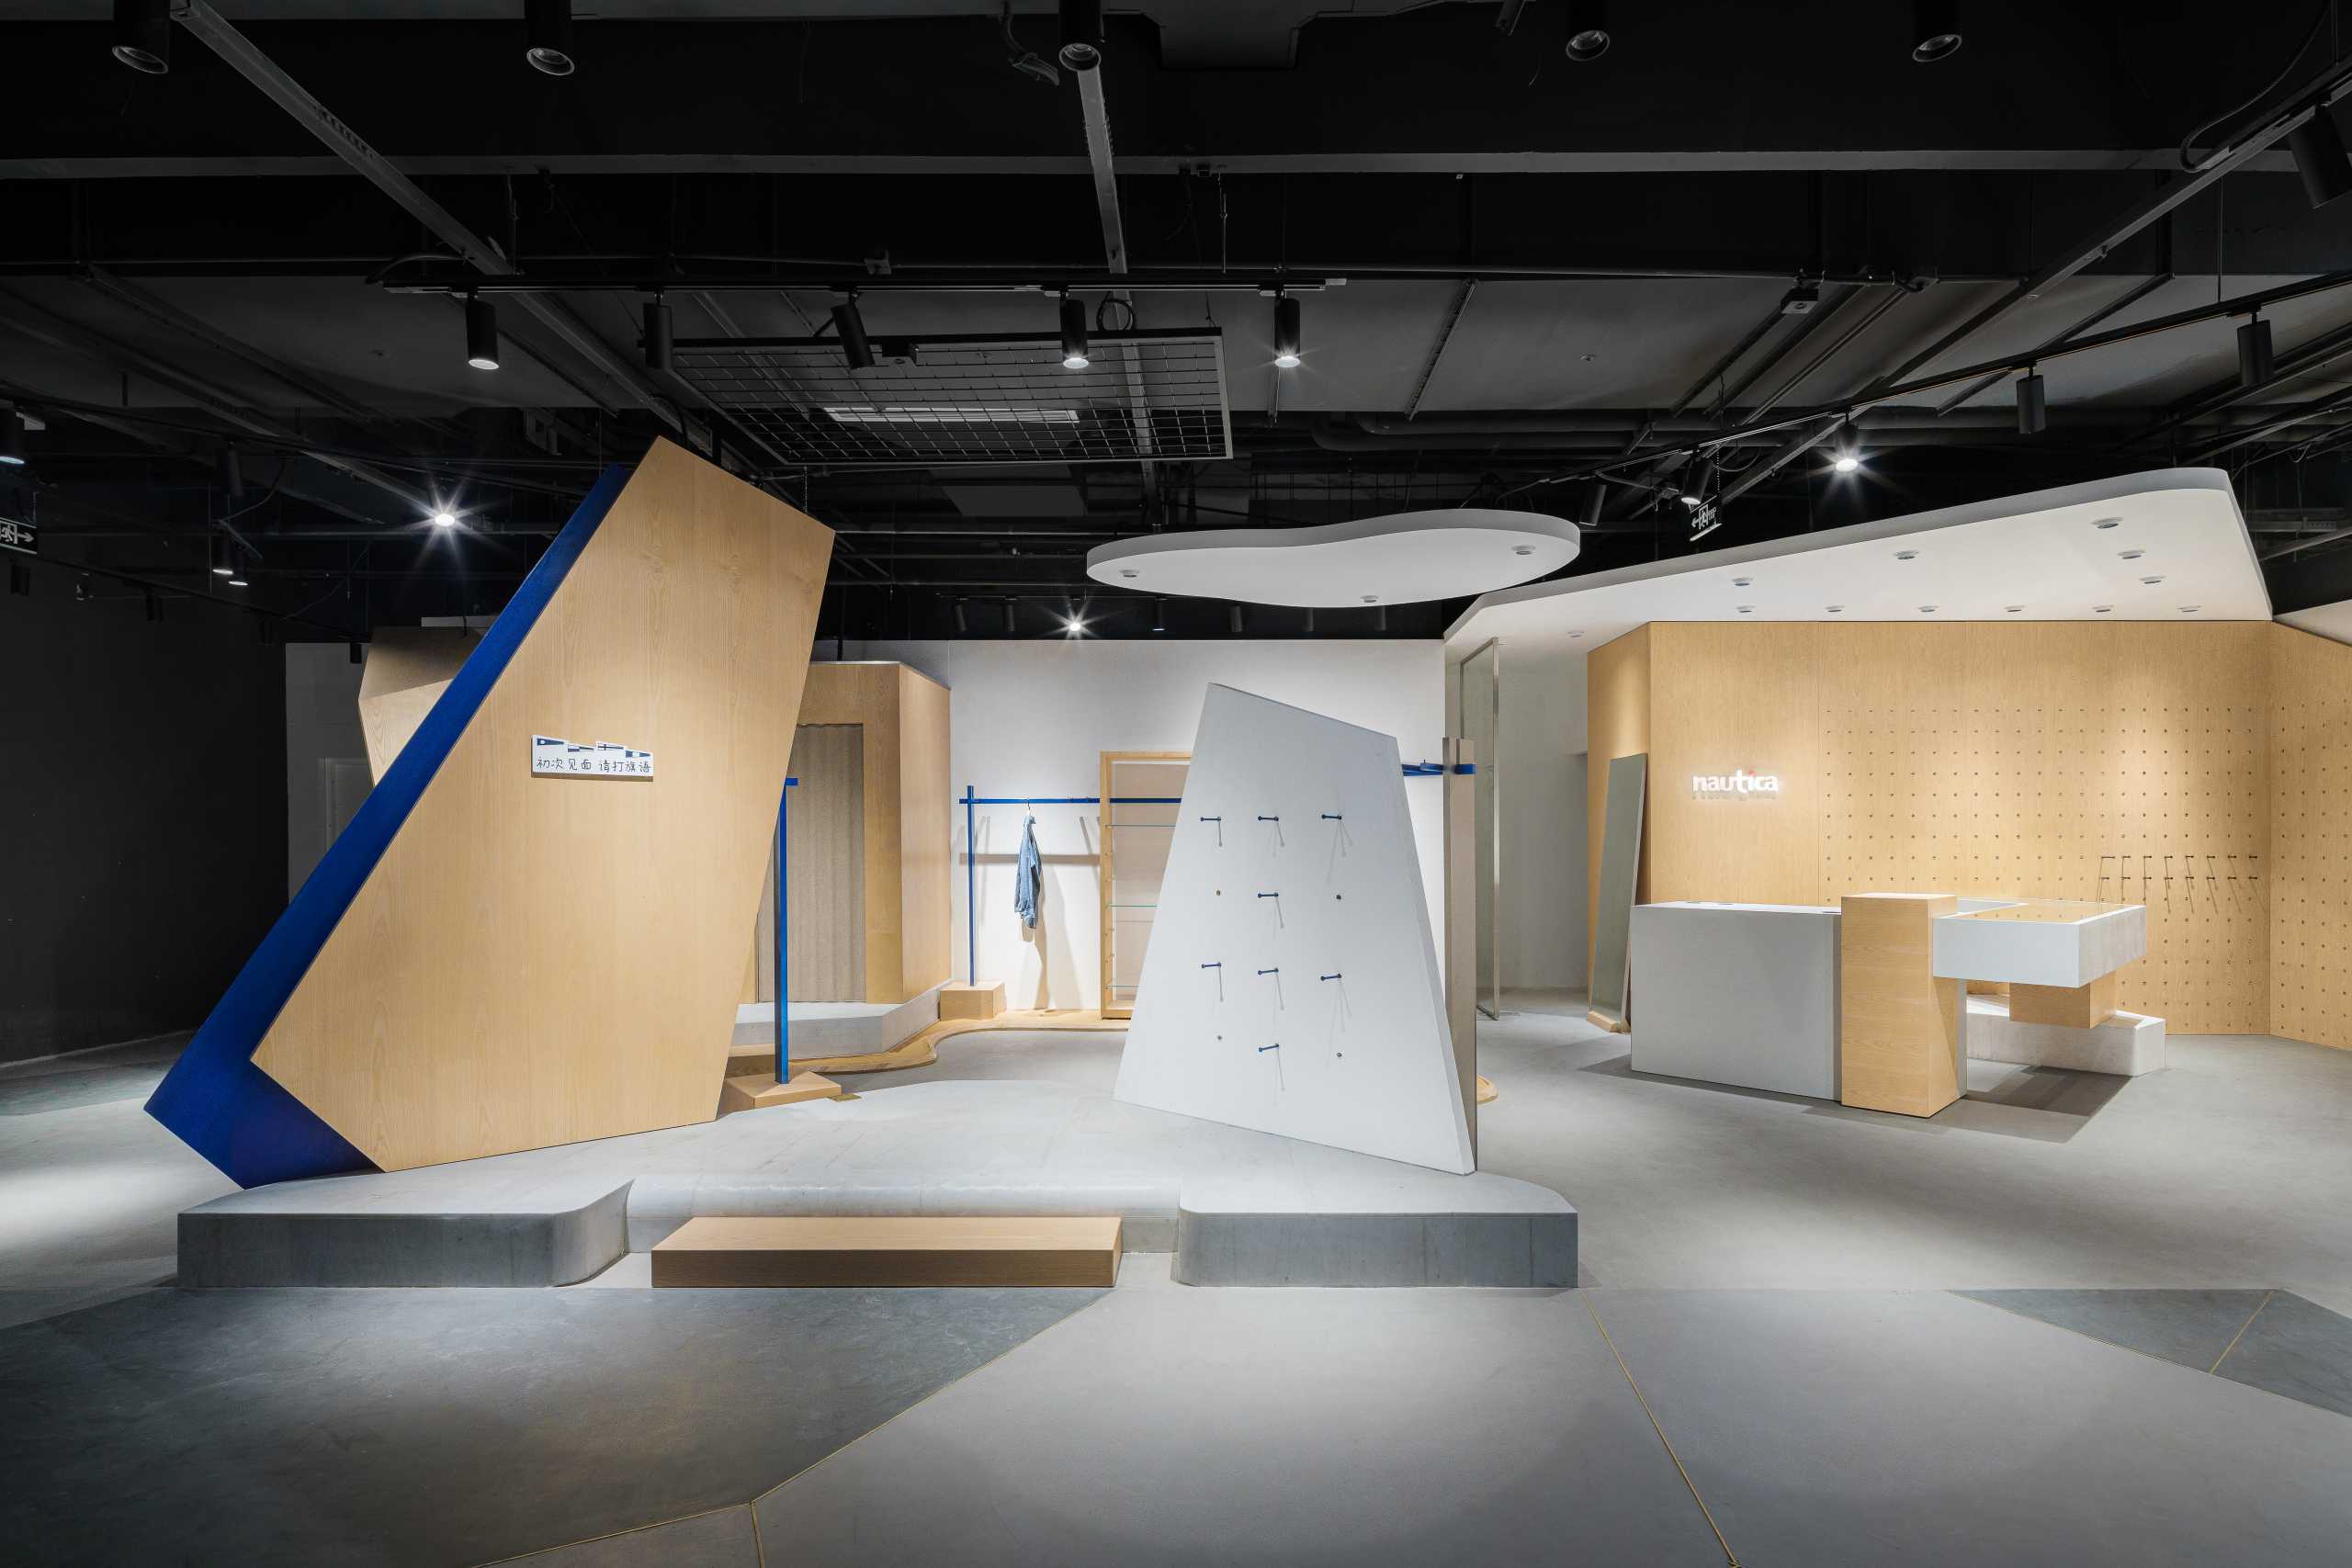 nautica white sail - the first nautica Japan concept store in